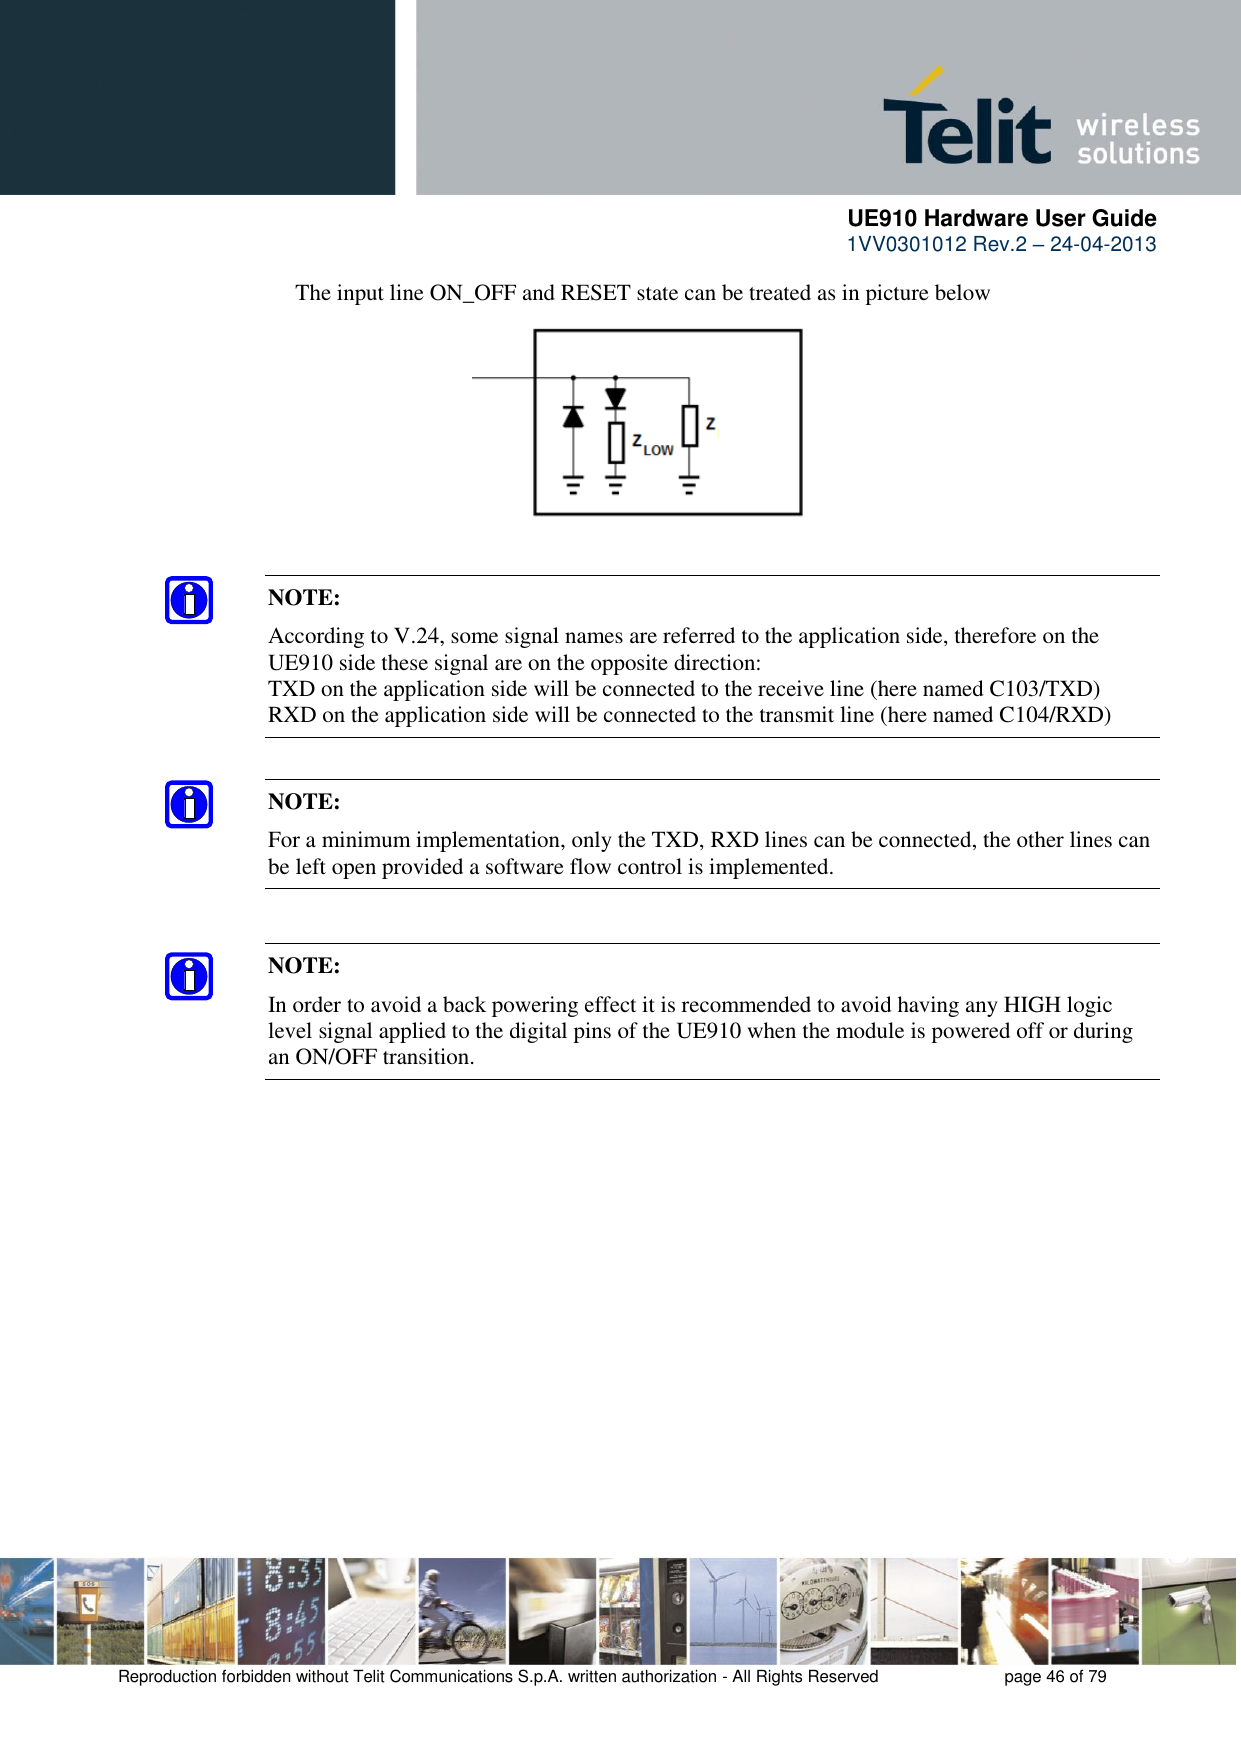      UE910 Hardware User Guide  1VV0301012 Rev.2 – 24-04-2013    Reproduction forbidden without Telit Communications S.p.A. written authorization - All Rights Reserved    page 46 of 79  The input line ON_OFF and RESET state can be treated as in picture below     NOTE: According to V.24, some signal names are referred to the application side, therefore on the UE910 side these signal are on the opposite direction:  TXD on the application side will be connected to the receive line (here named C103/TXD) RXD on the application side will be connected to the transmit line (here named C104/RXD) NOTE: For a minimum implementation, only the TXD, RXD lines can be connected, the other lines can be left open provided a software flow control is implemented. NOTE: In order to avoid a back powering effect it is recommended to avoid having any HIGH logic level signal applied to the digital pins of the UE910 when the module is powered off or during an ON/OFF transition. 